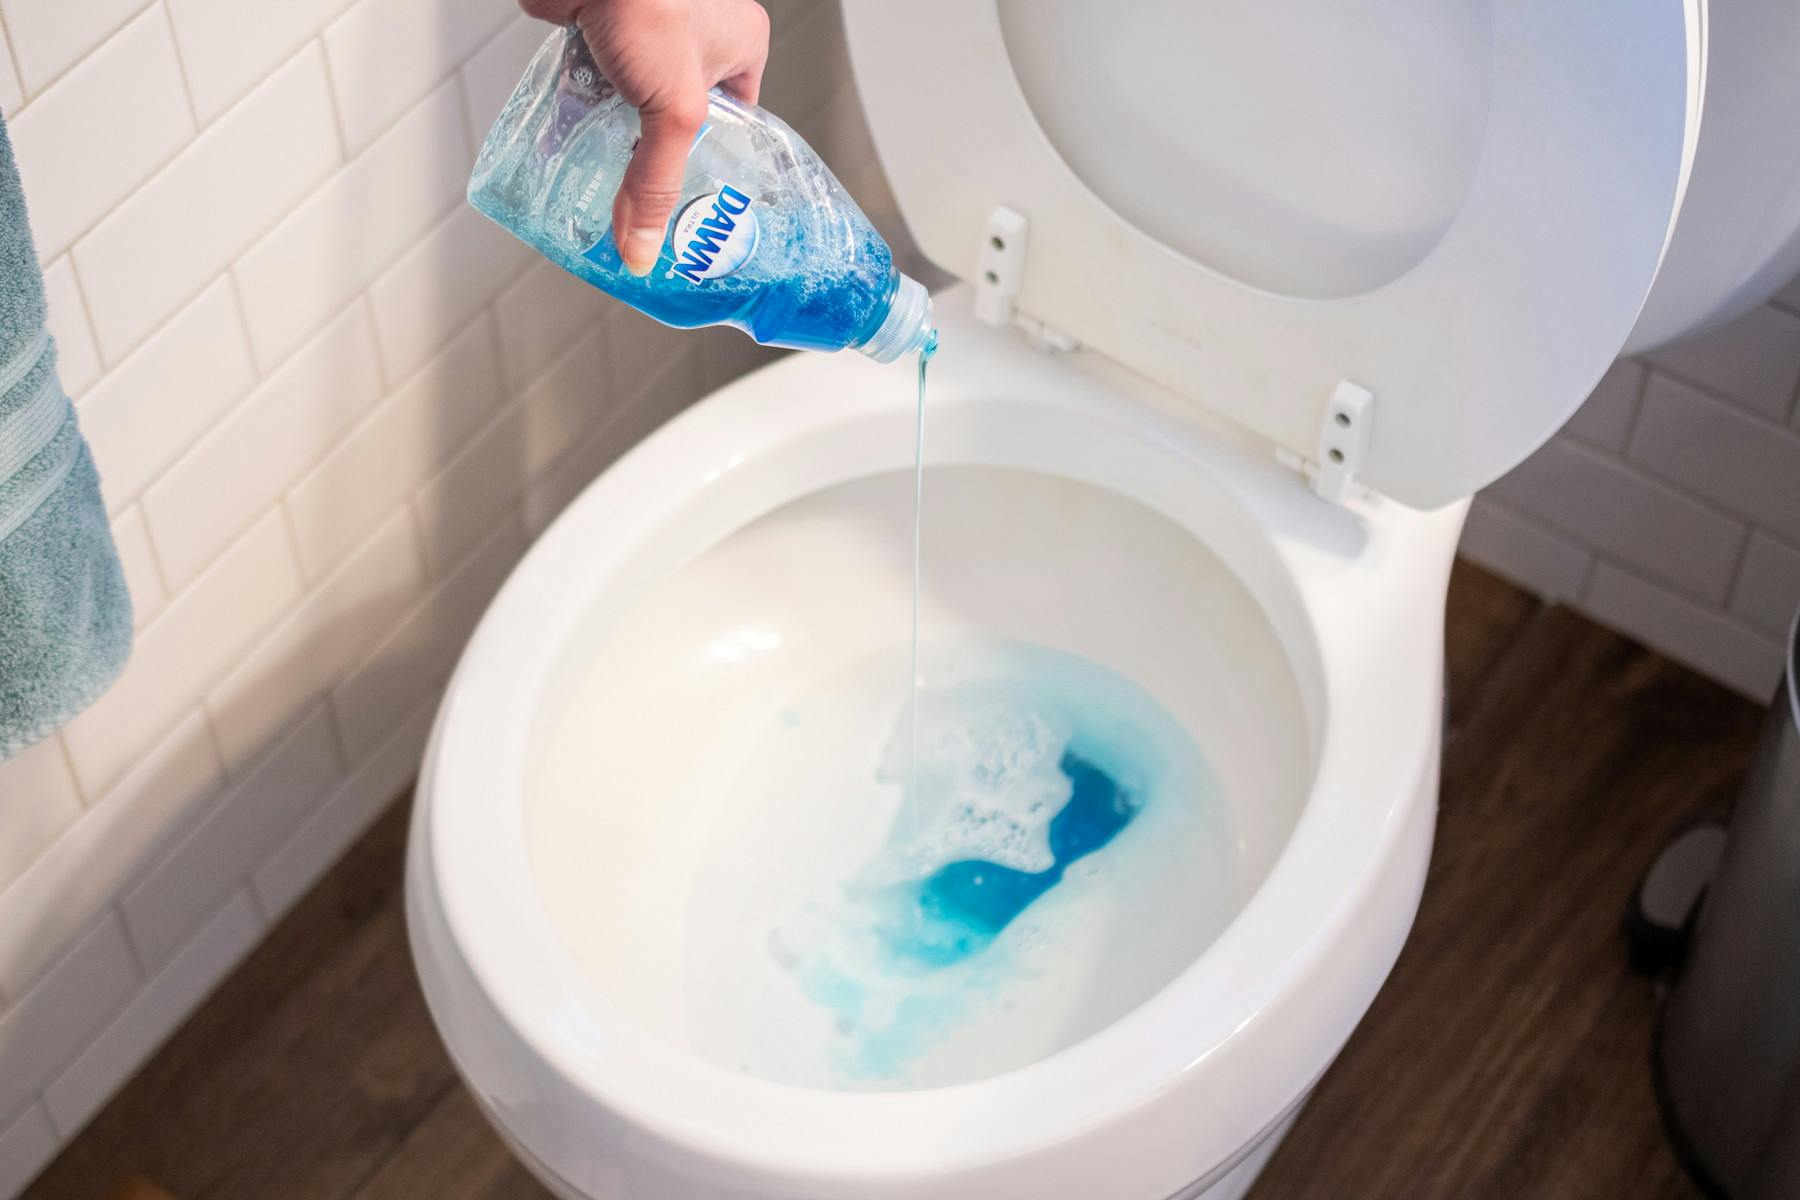 24 Dawn Dish Soap Uses That Will Make Your Life Easier - The Krazy Coupon Lady